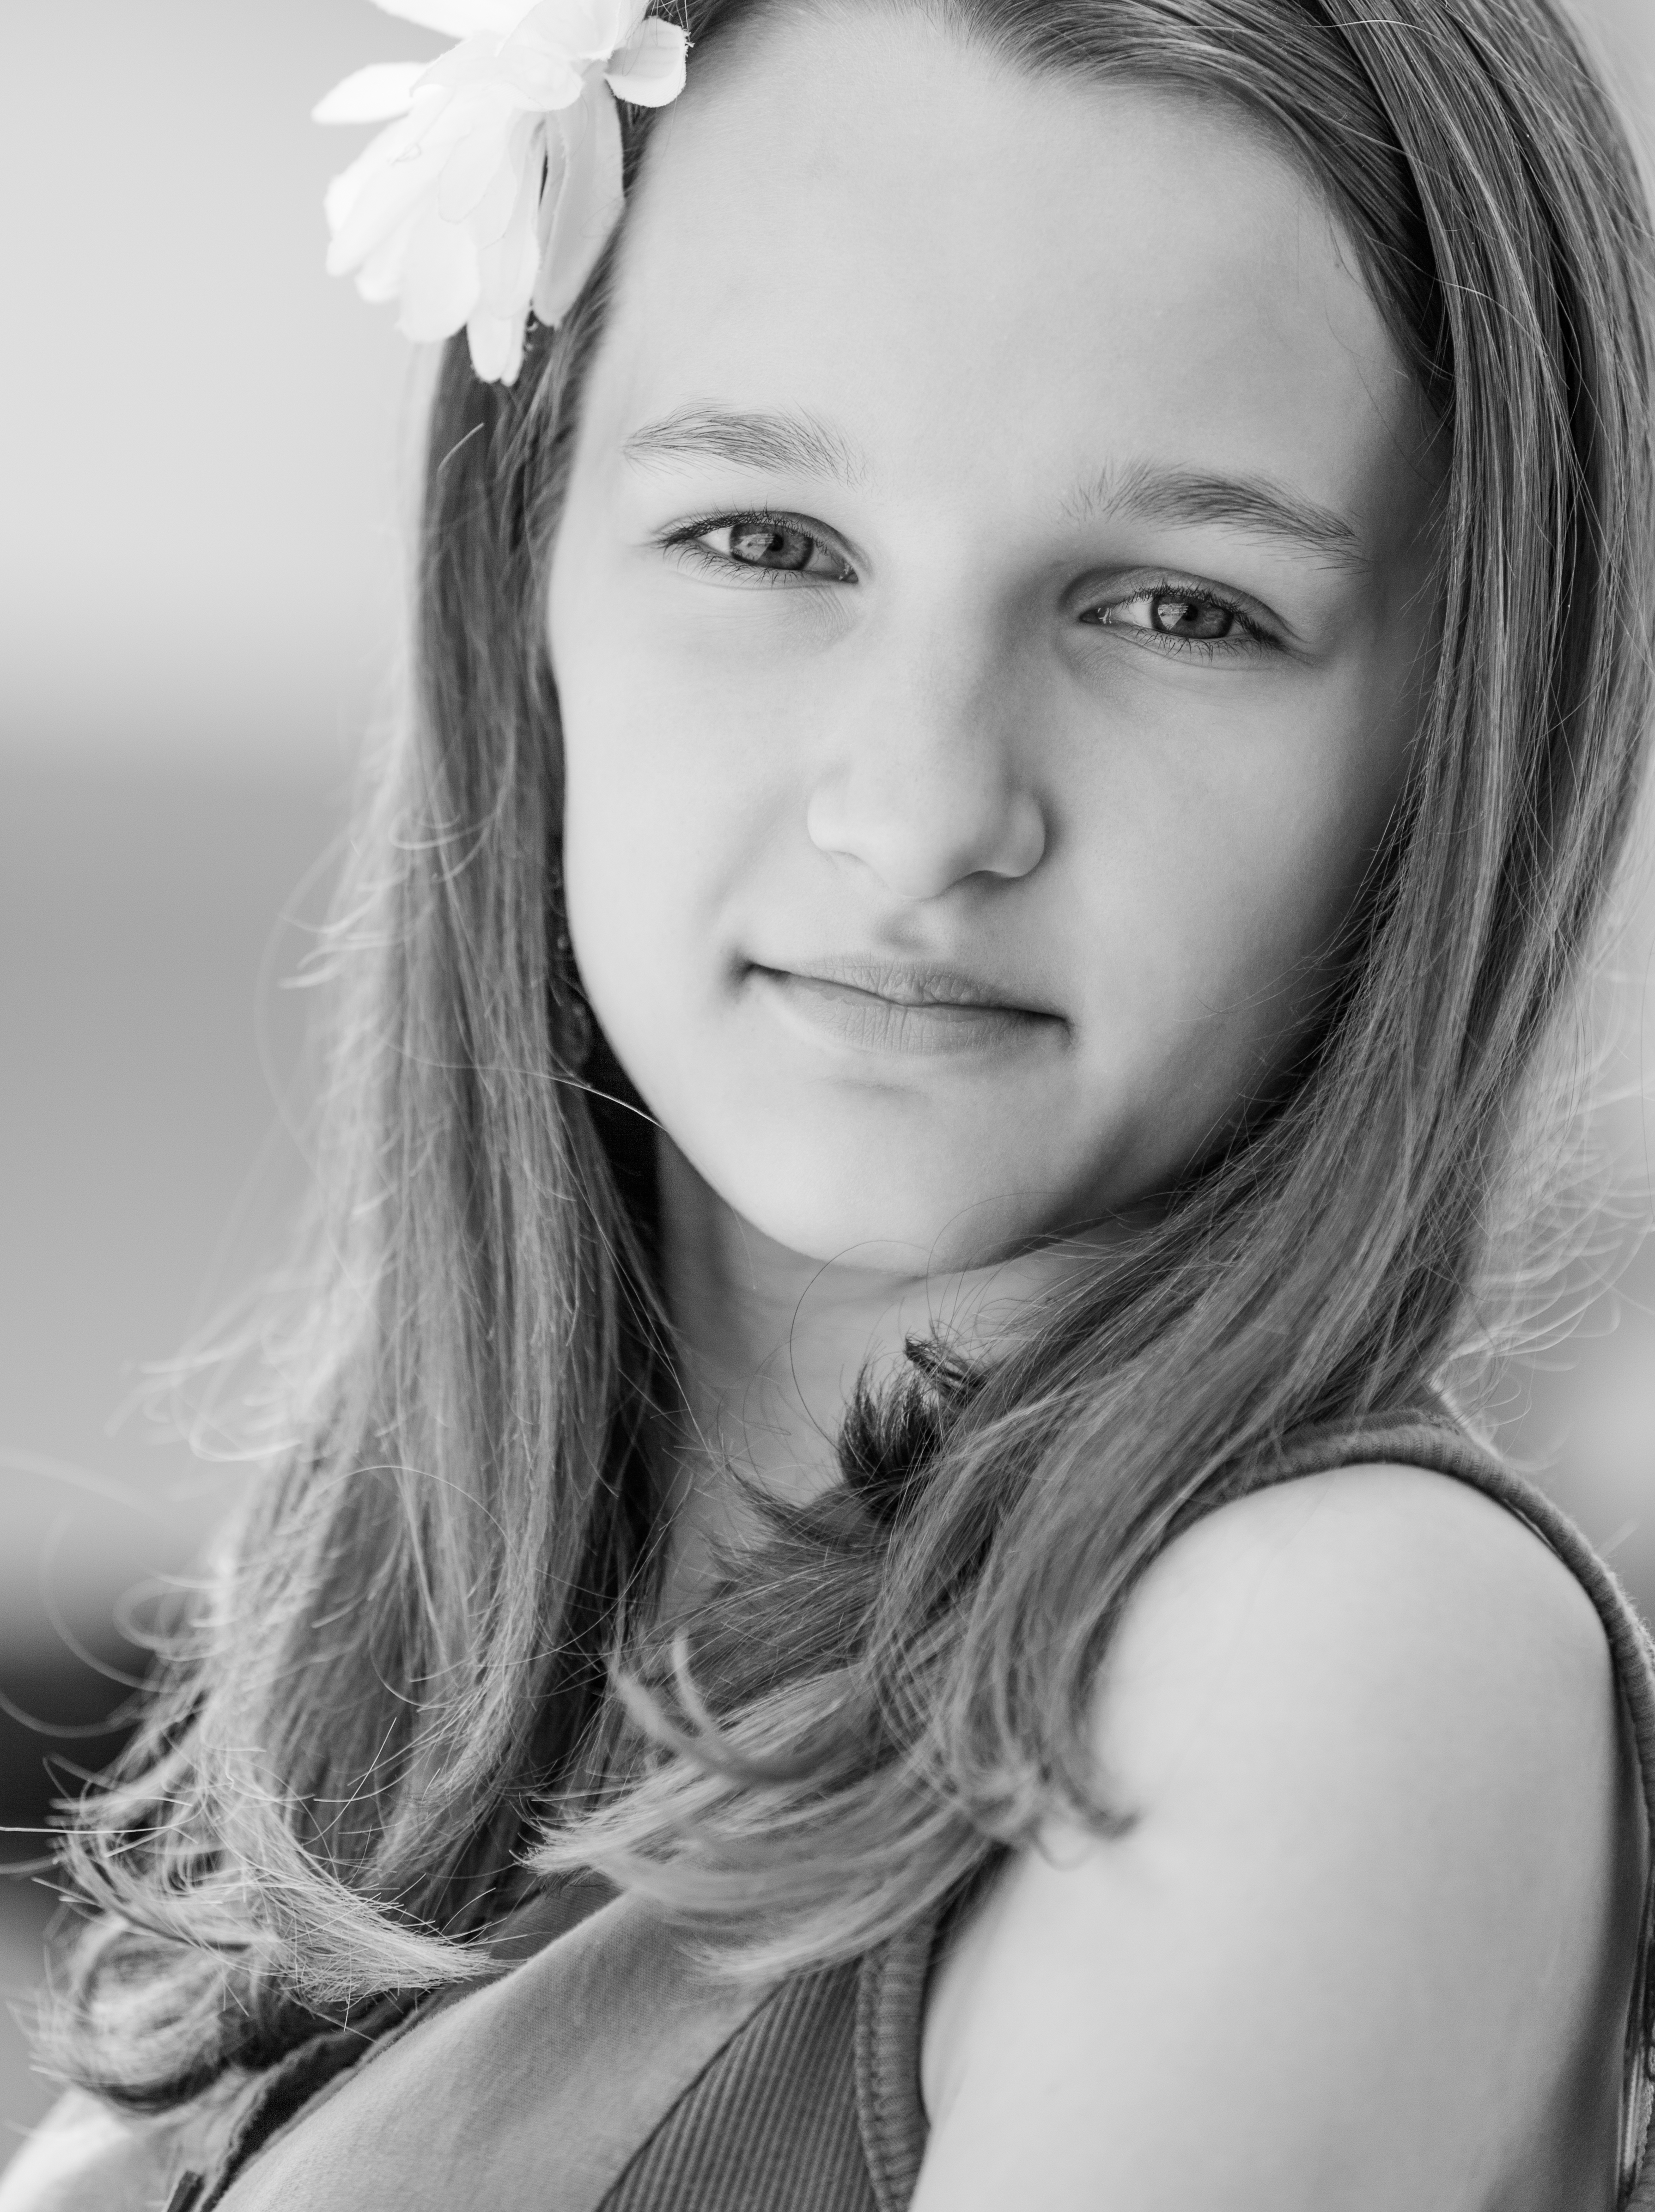 a very photogenic 12-year-old Catholic girl photographed in June 2014, picture 4/4, black and white